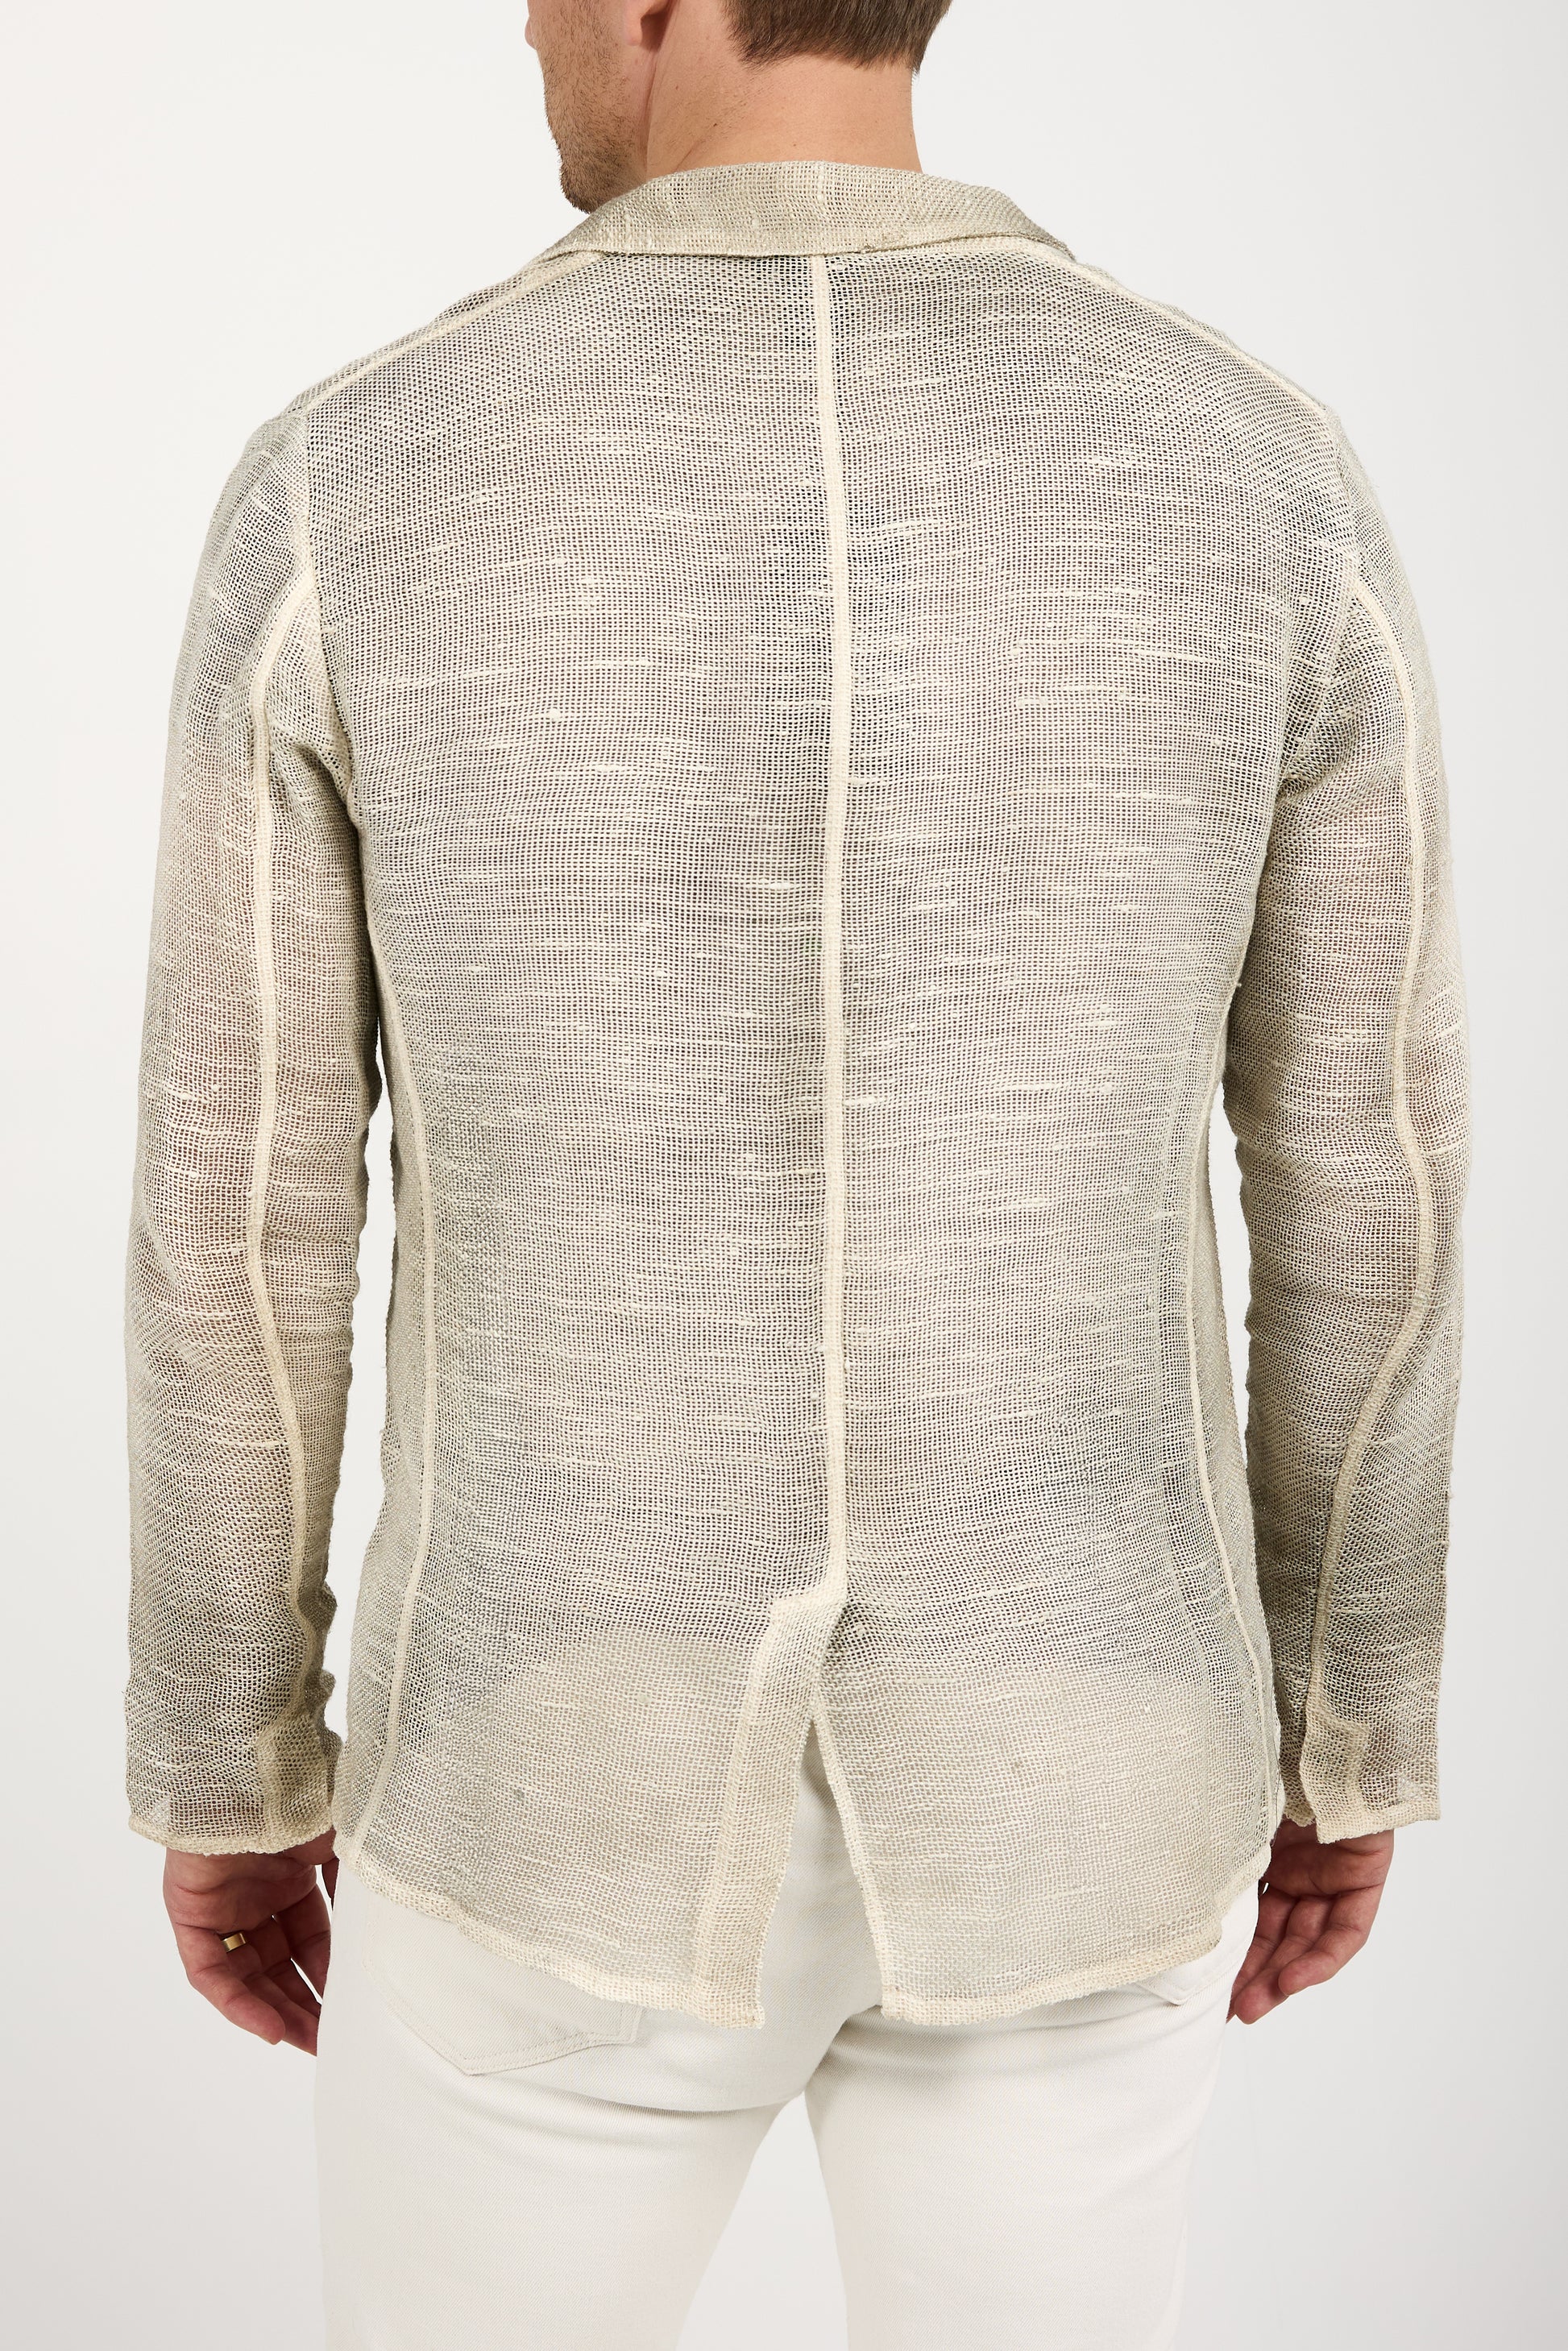 AVANT TOI Hand-Painted Net Fabric Blazer Jacket in Taupe